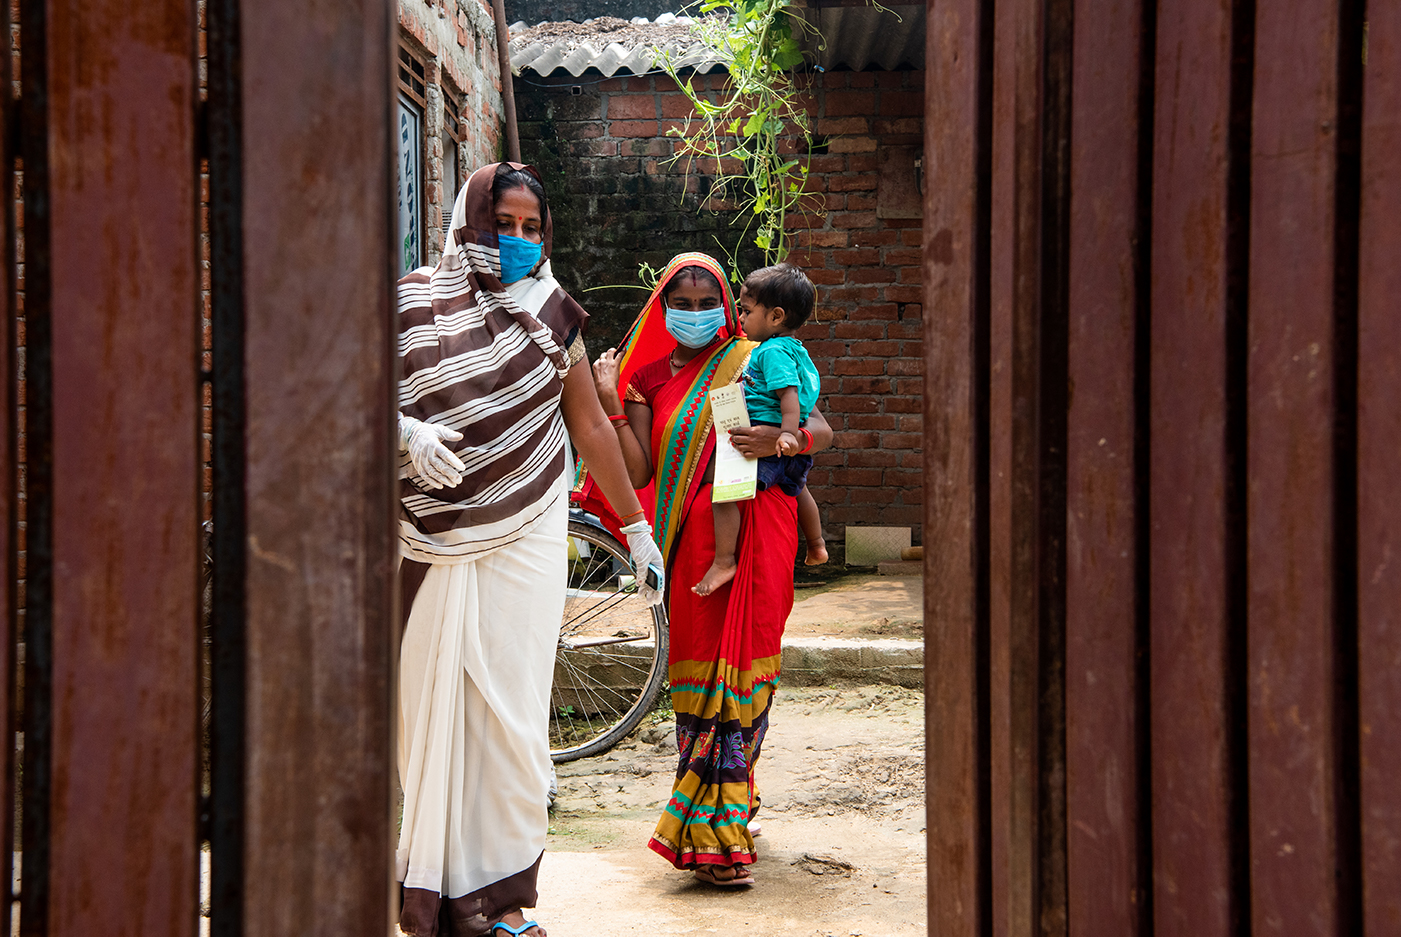 ©Gates Archive/Saumya Khandelwal. Caption: L-R Neelam Kumari,  accredited social health activist (ASHA), accompanies a mother, Uma and her child, Bhawna, to the primary school for a Village Health Sanitation and Nutrition Day Session in Sandauli, Uttar Pradesh, India on September 16, 2020. ASHAs have been instrumental in spreading awareness about COVID-19  and facilitating health services at the rural level.